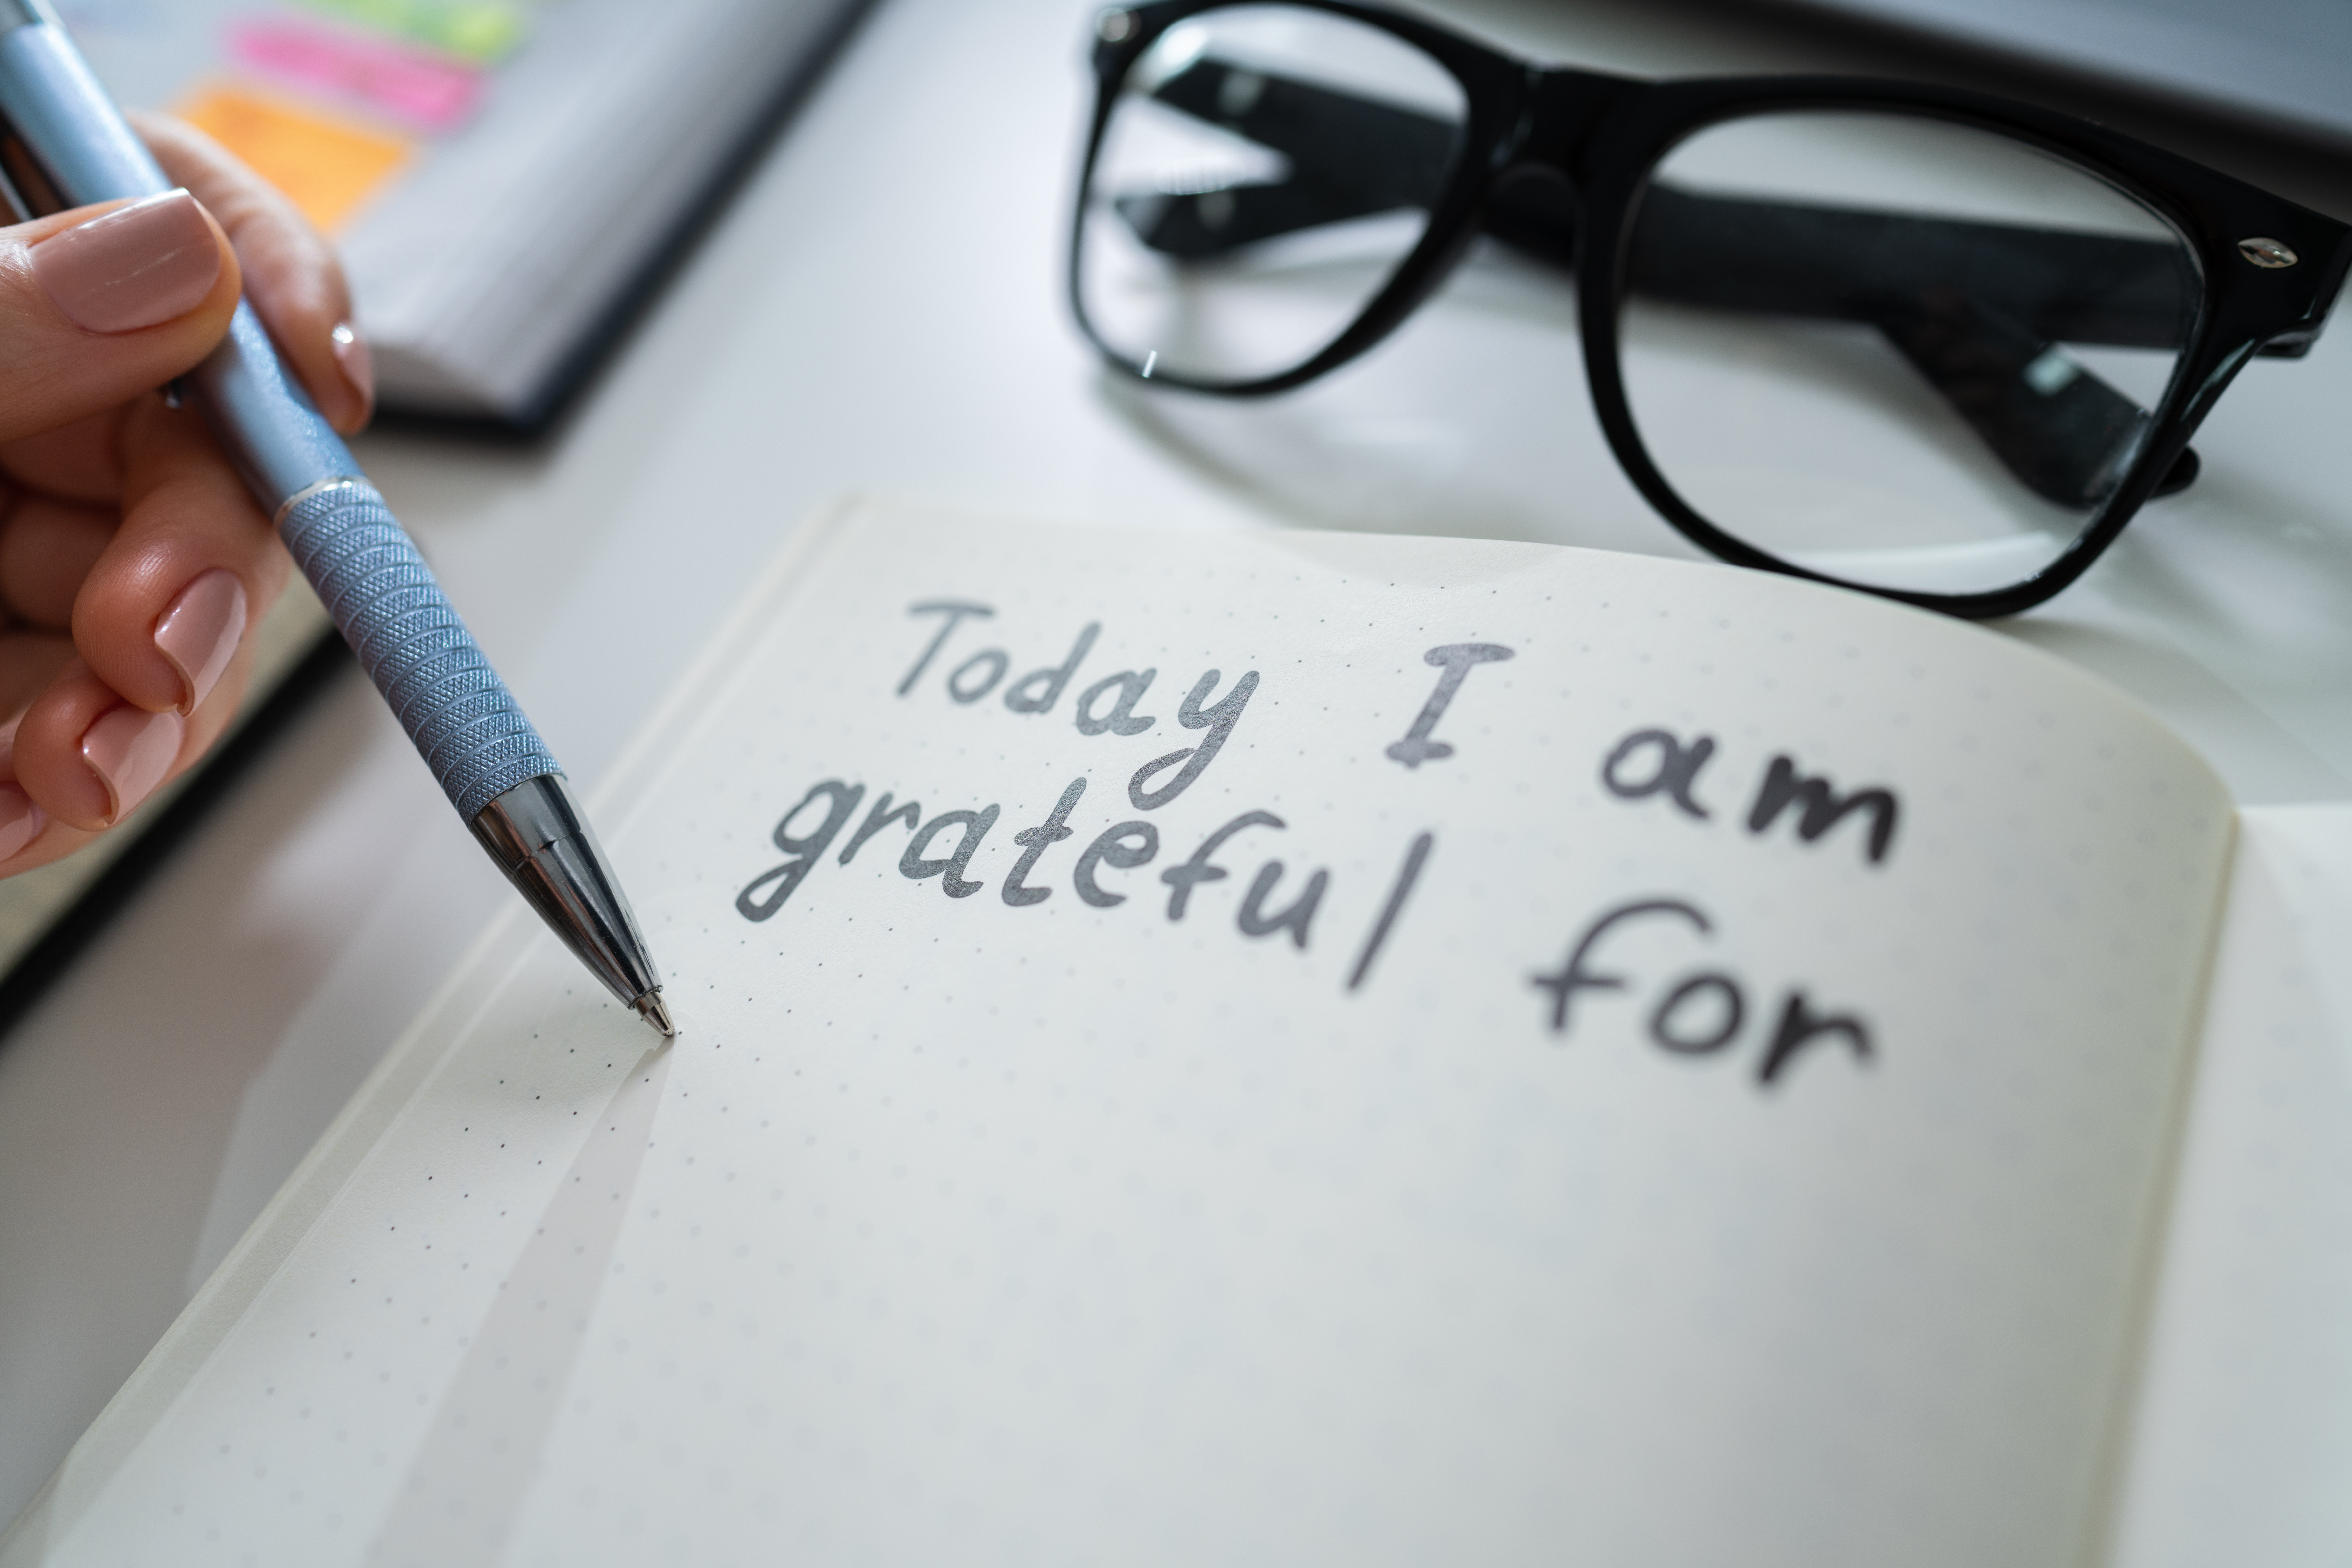 Why is it Important for You to Practice the Art of Being Grateful?